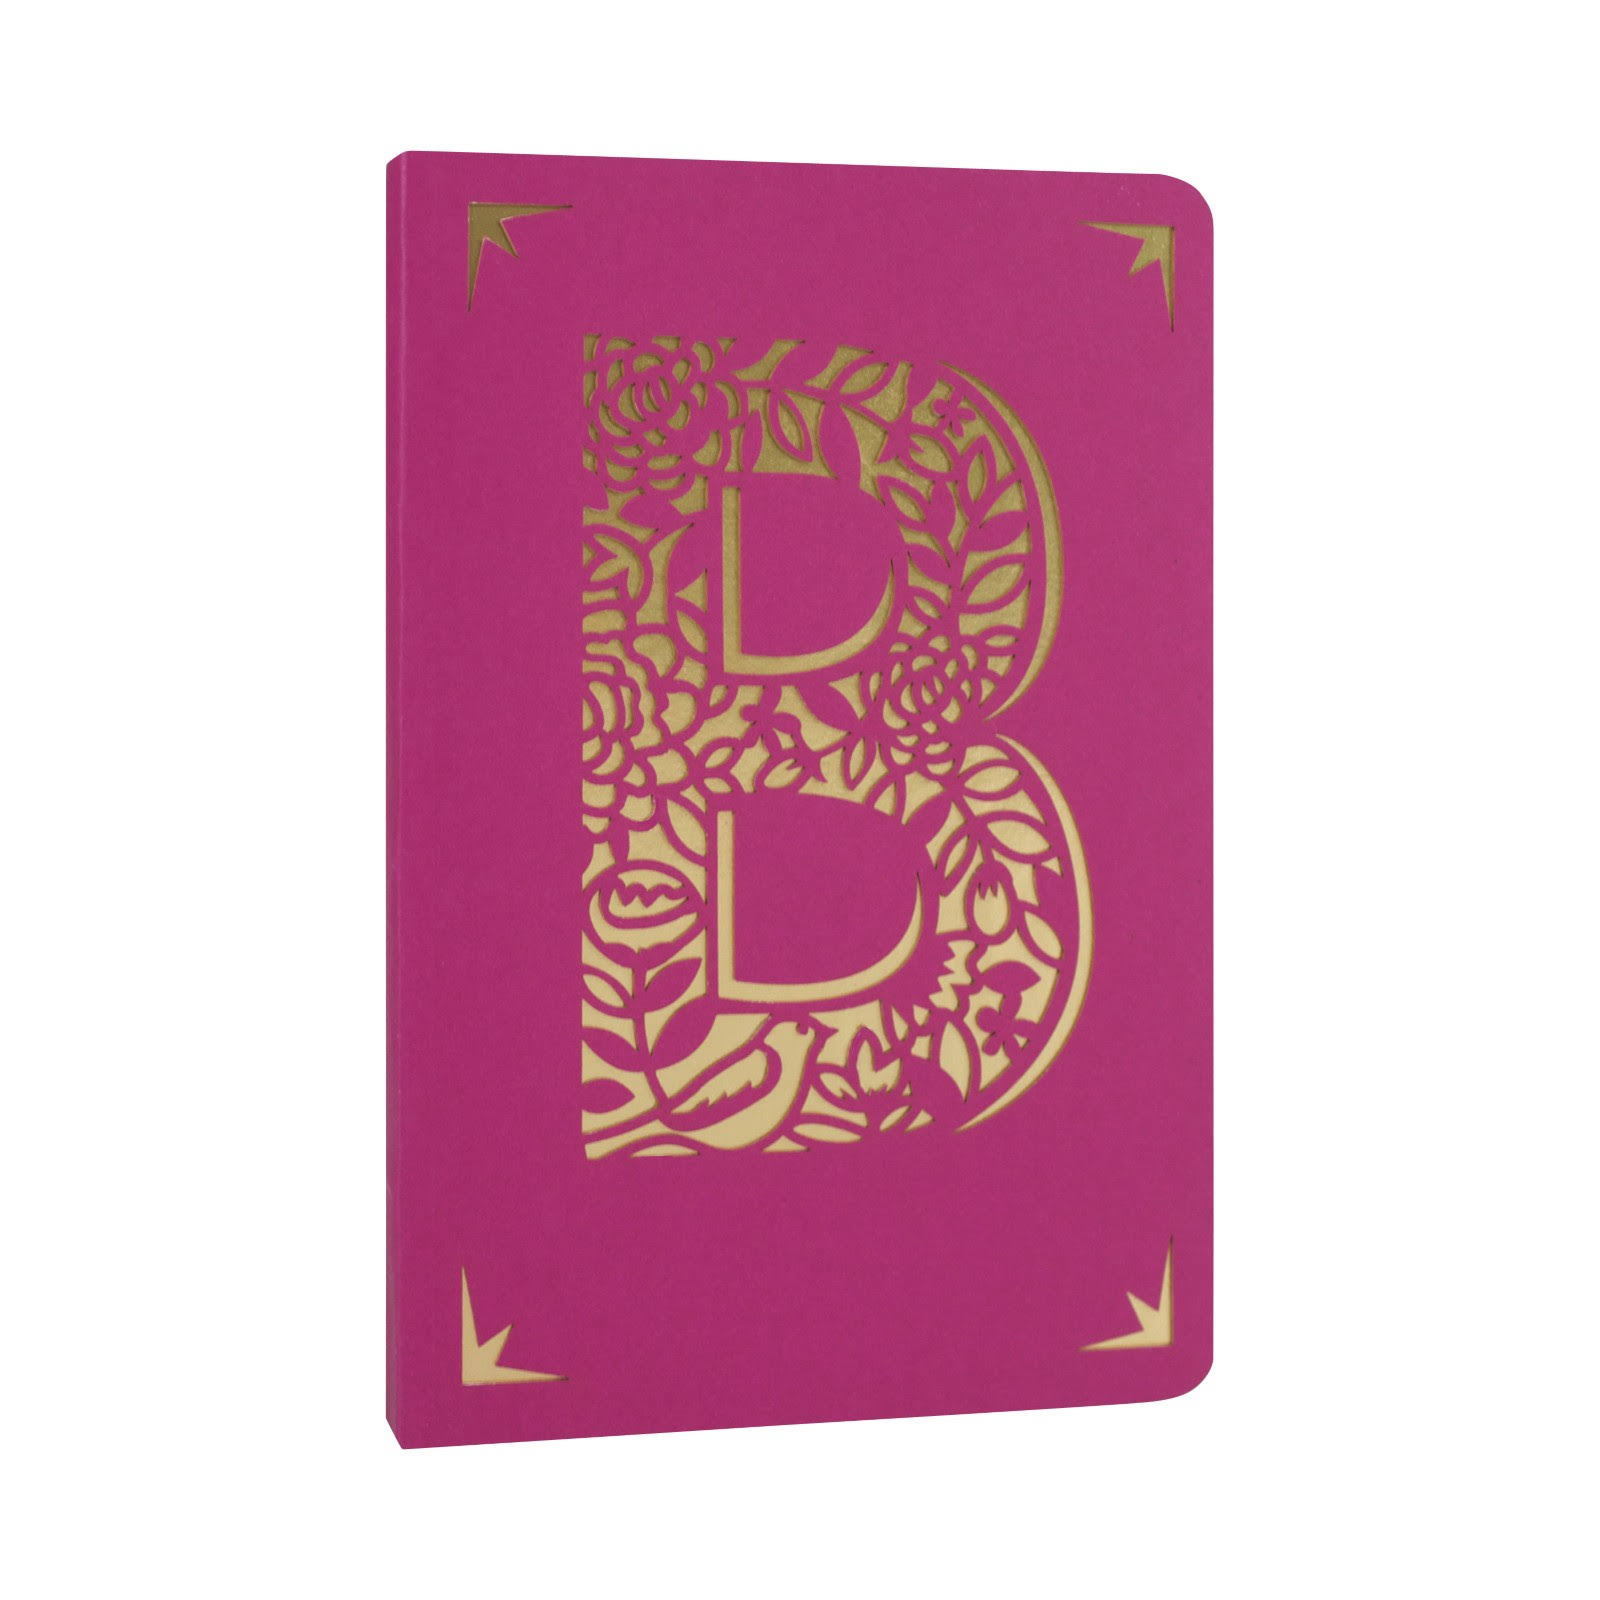 Monogrammed A6 Foil Notebooks Available A-Z or & 124 Lined Pages Portico 